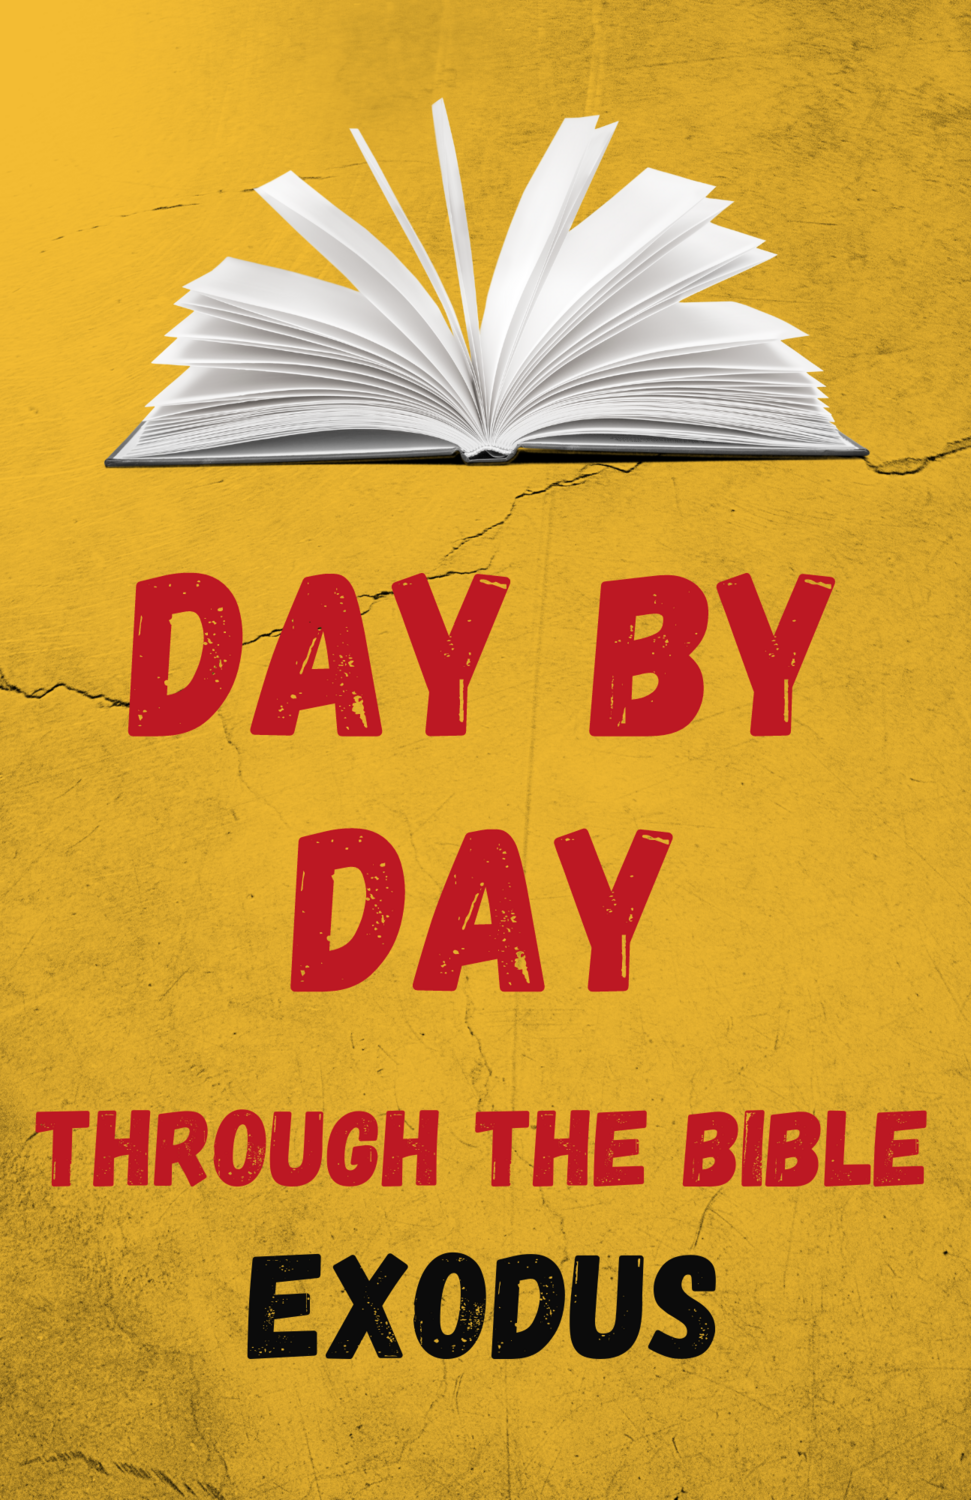 Day by Day Through the Bible: Forty Days in Exodus - Digital Download